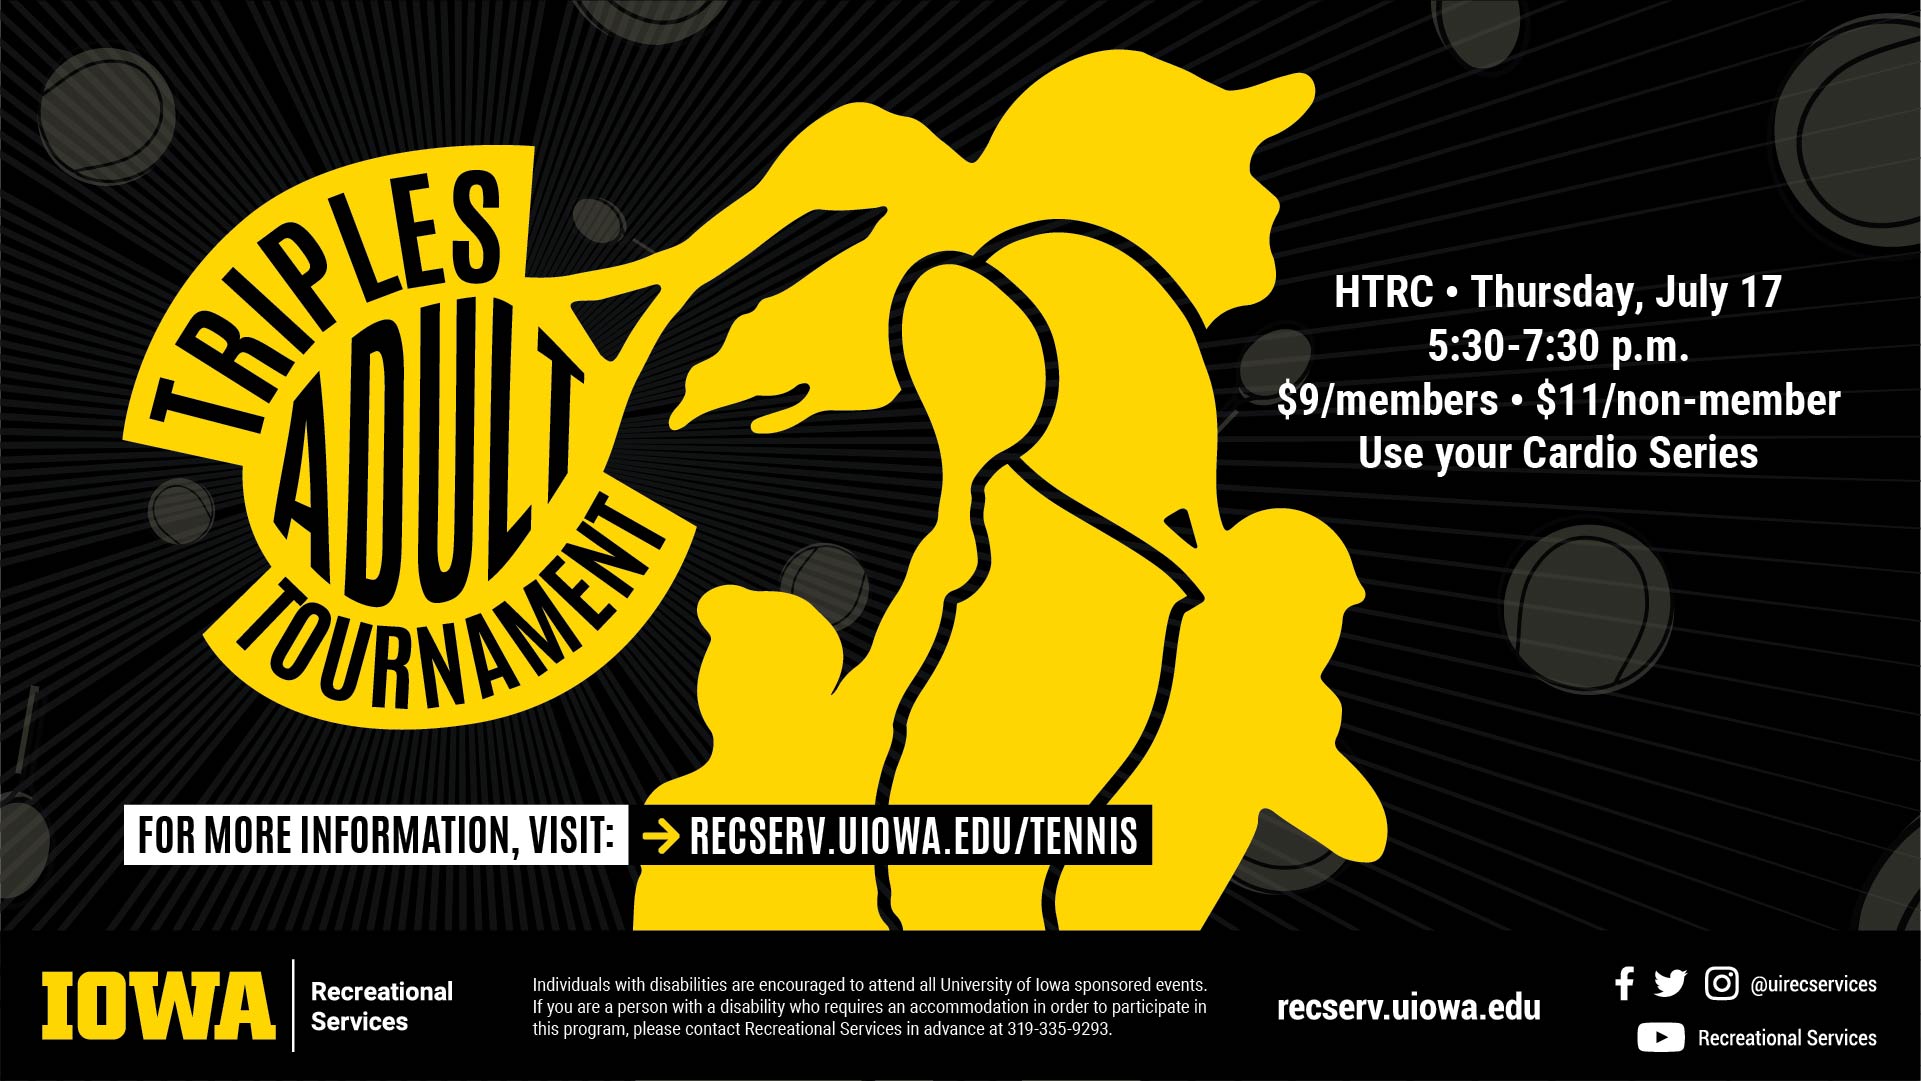 Triples Adult Tournament Summer 2022! Event is July 17, visit reserve.uiowa.edu/tennis for more information